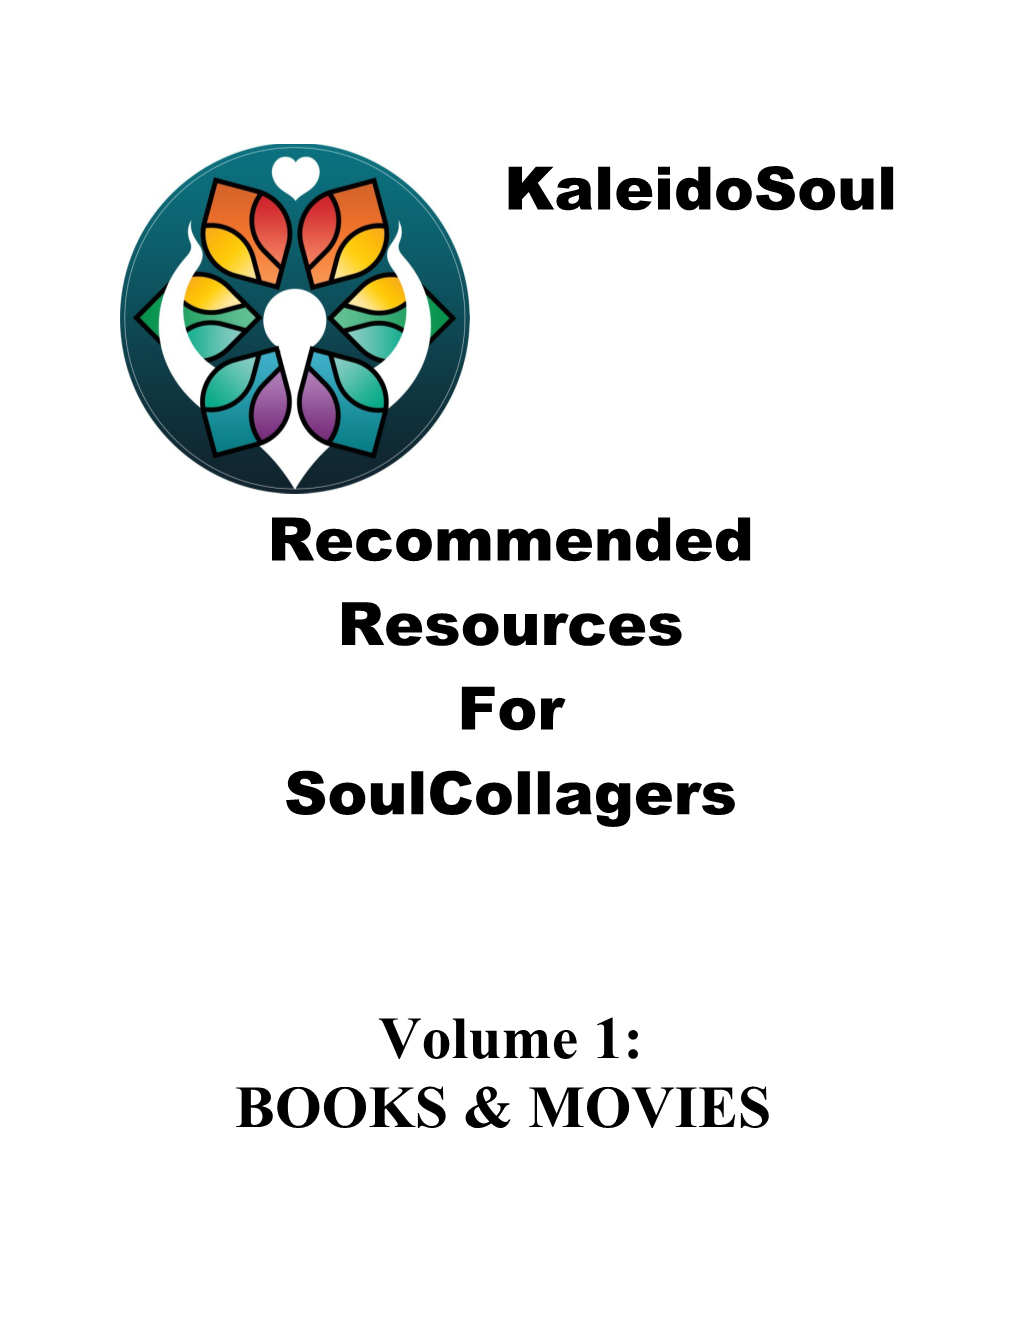 Resources for Soulcollagers: Books & Movies